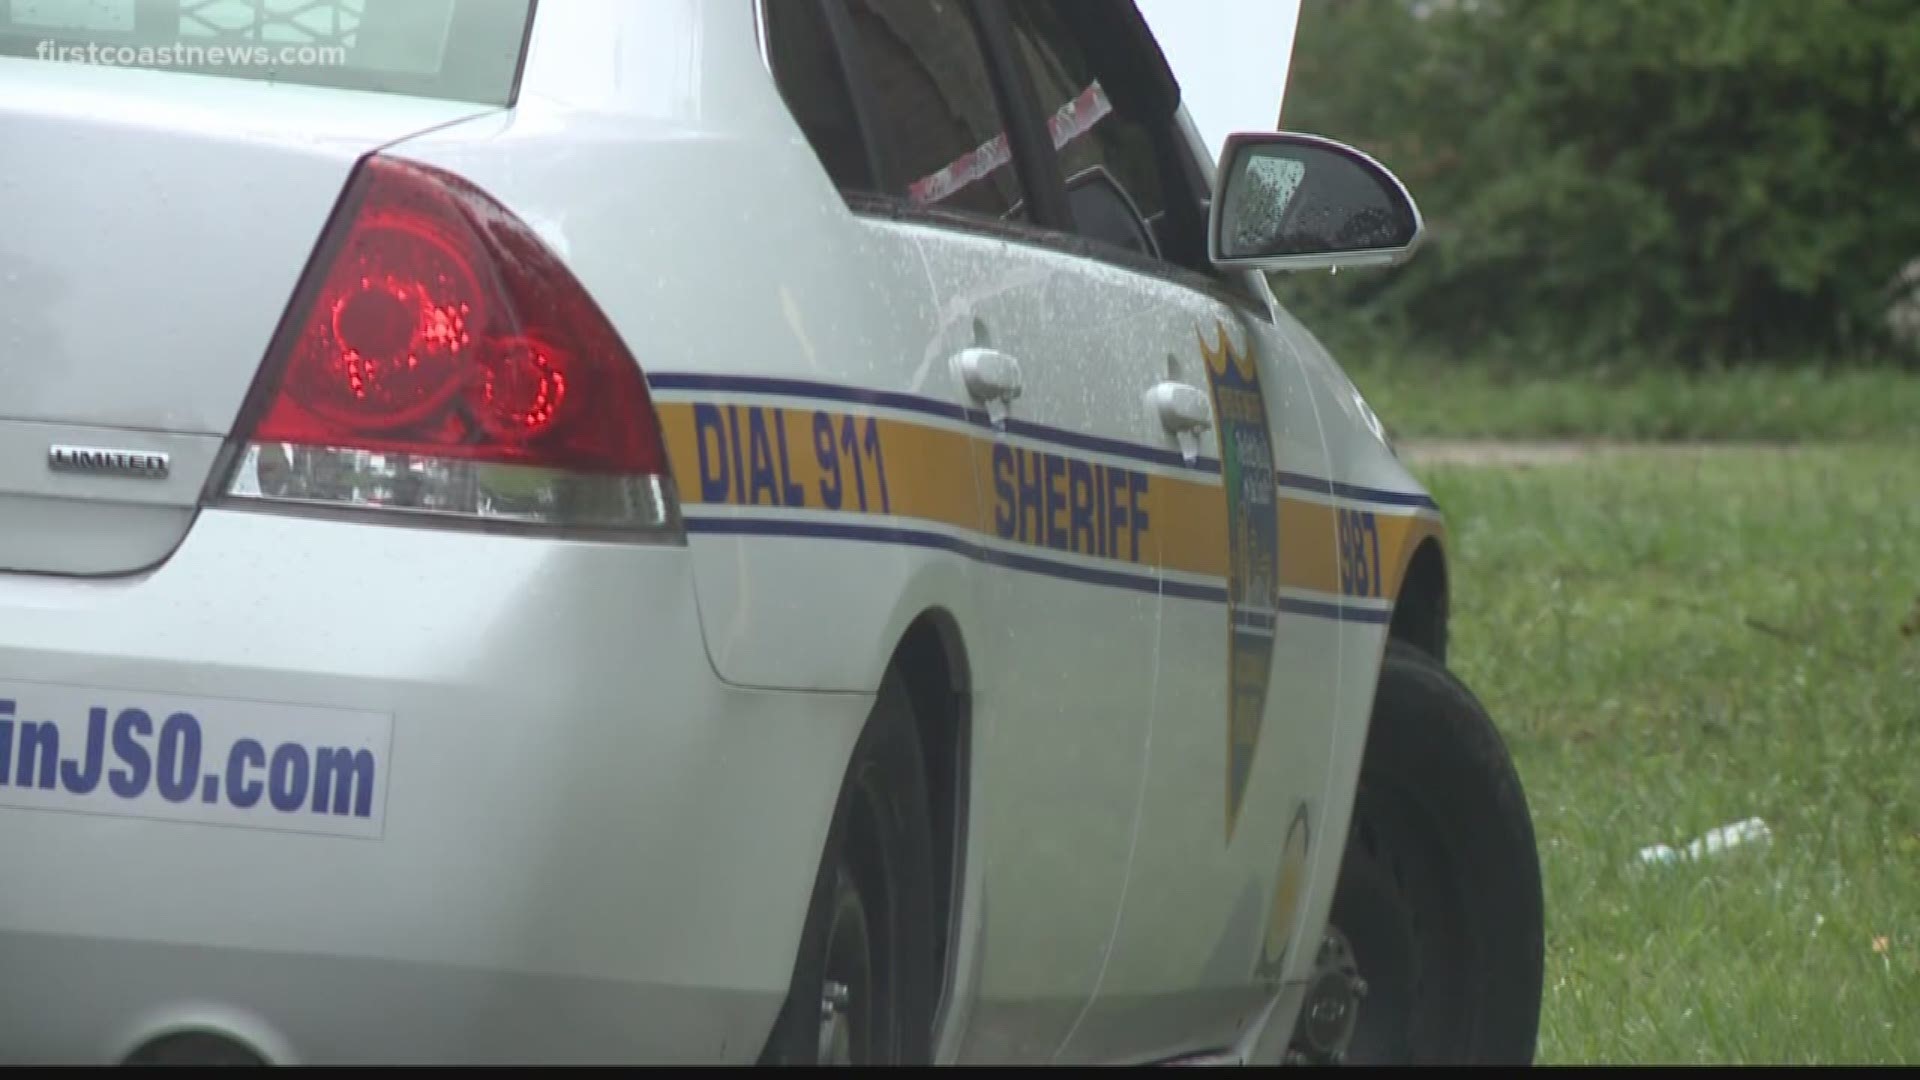 FCN's Lana Harris reports that residents on the Northside find shootouts like the one that took a 21-year-old man's life Saturday are all too common.